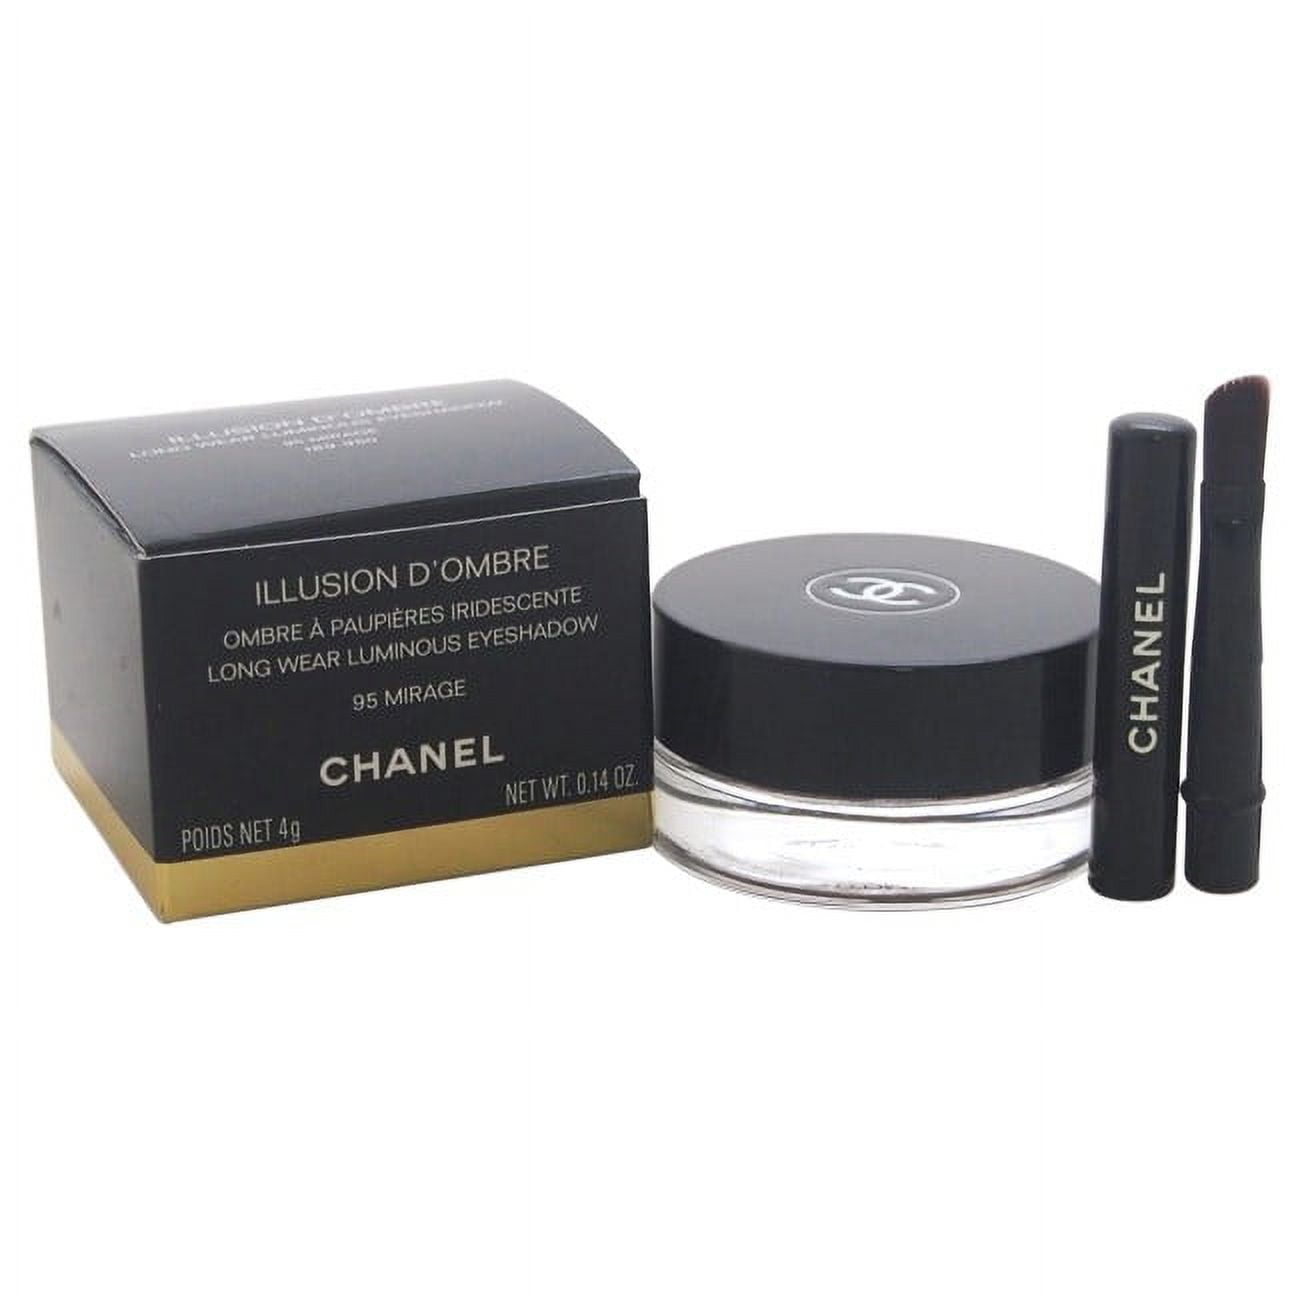 Beauty Makeup Etc: Chanel Illusion D'ombre Cream Eyeshadow in 95 Mirage